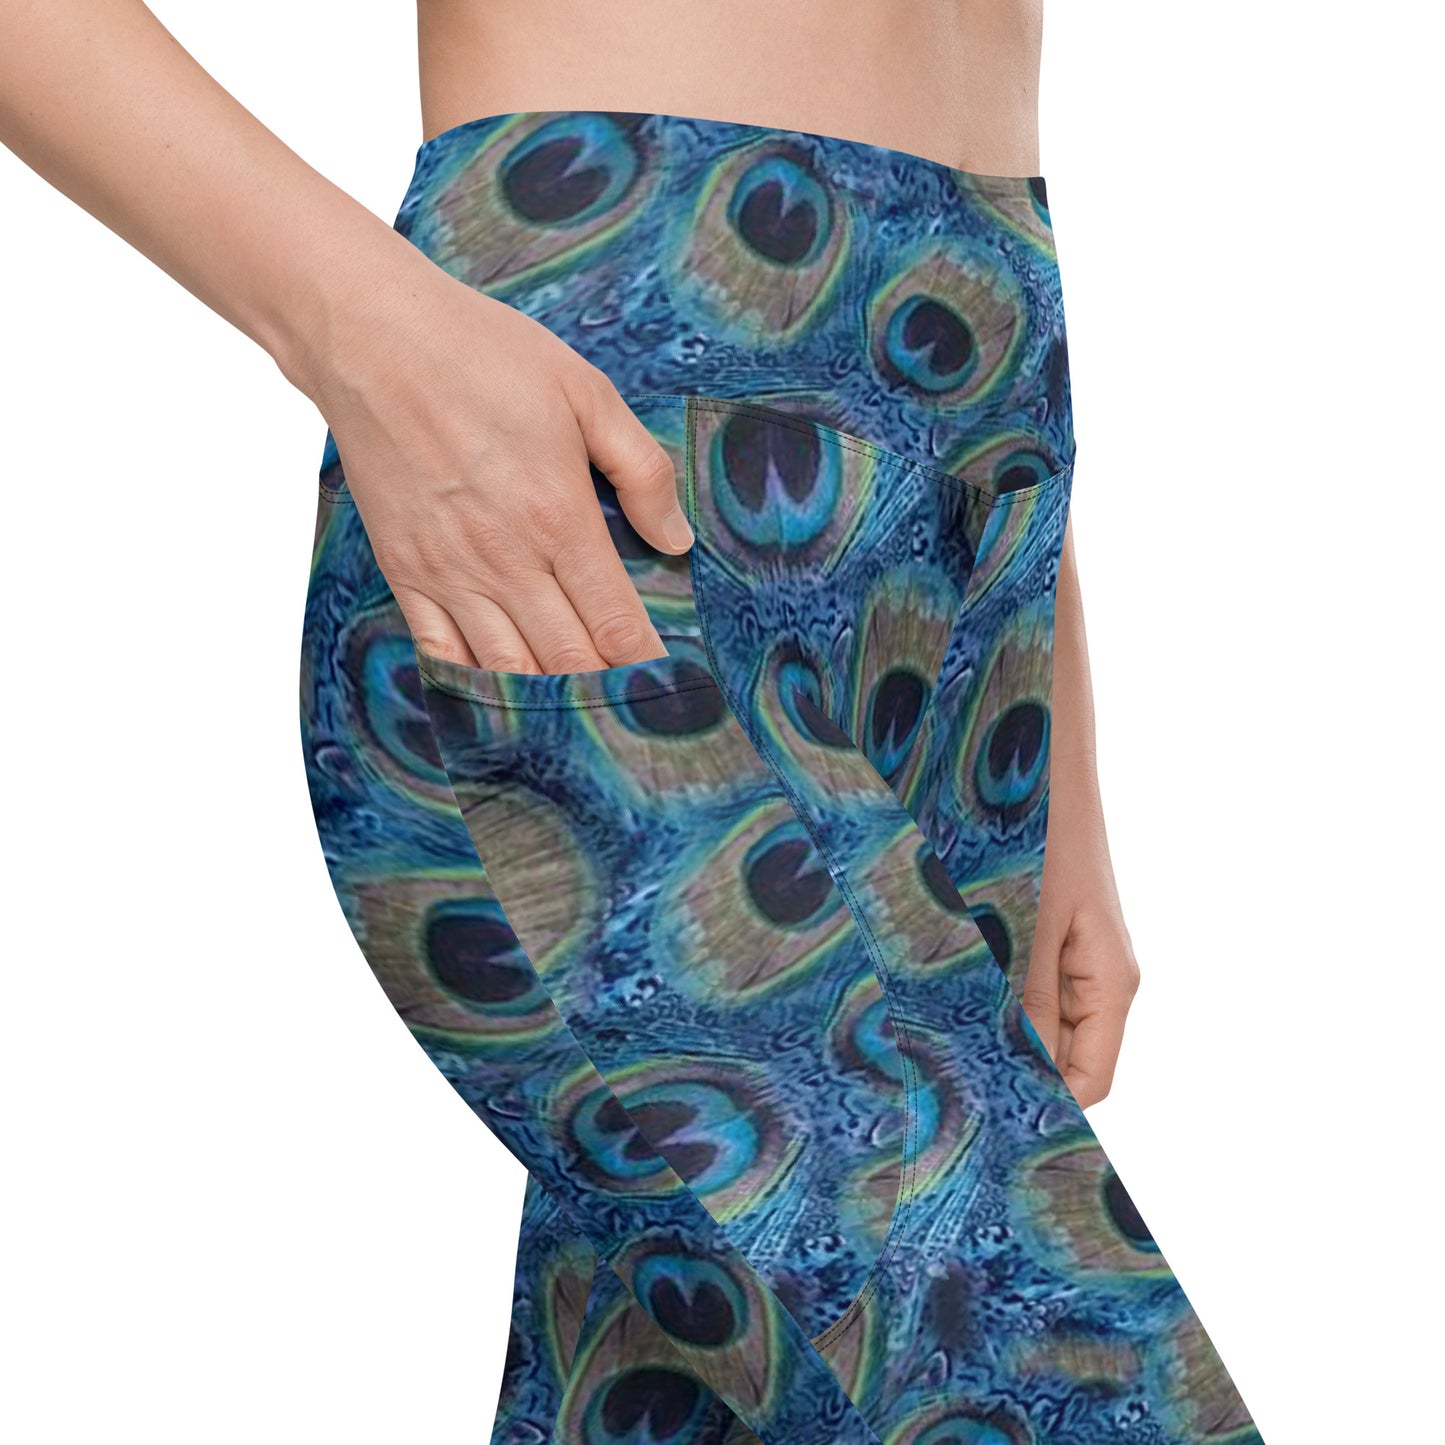 ELEVATED ESSENTIALS, THE PERFECT SIDE POCKET LEGGING PEACOCK PRINT